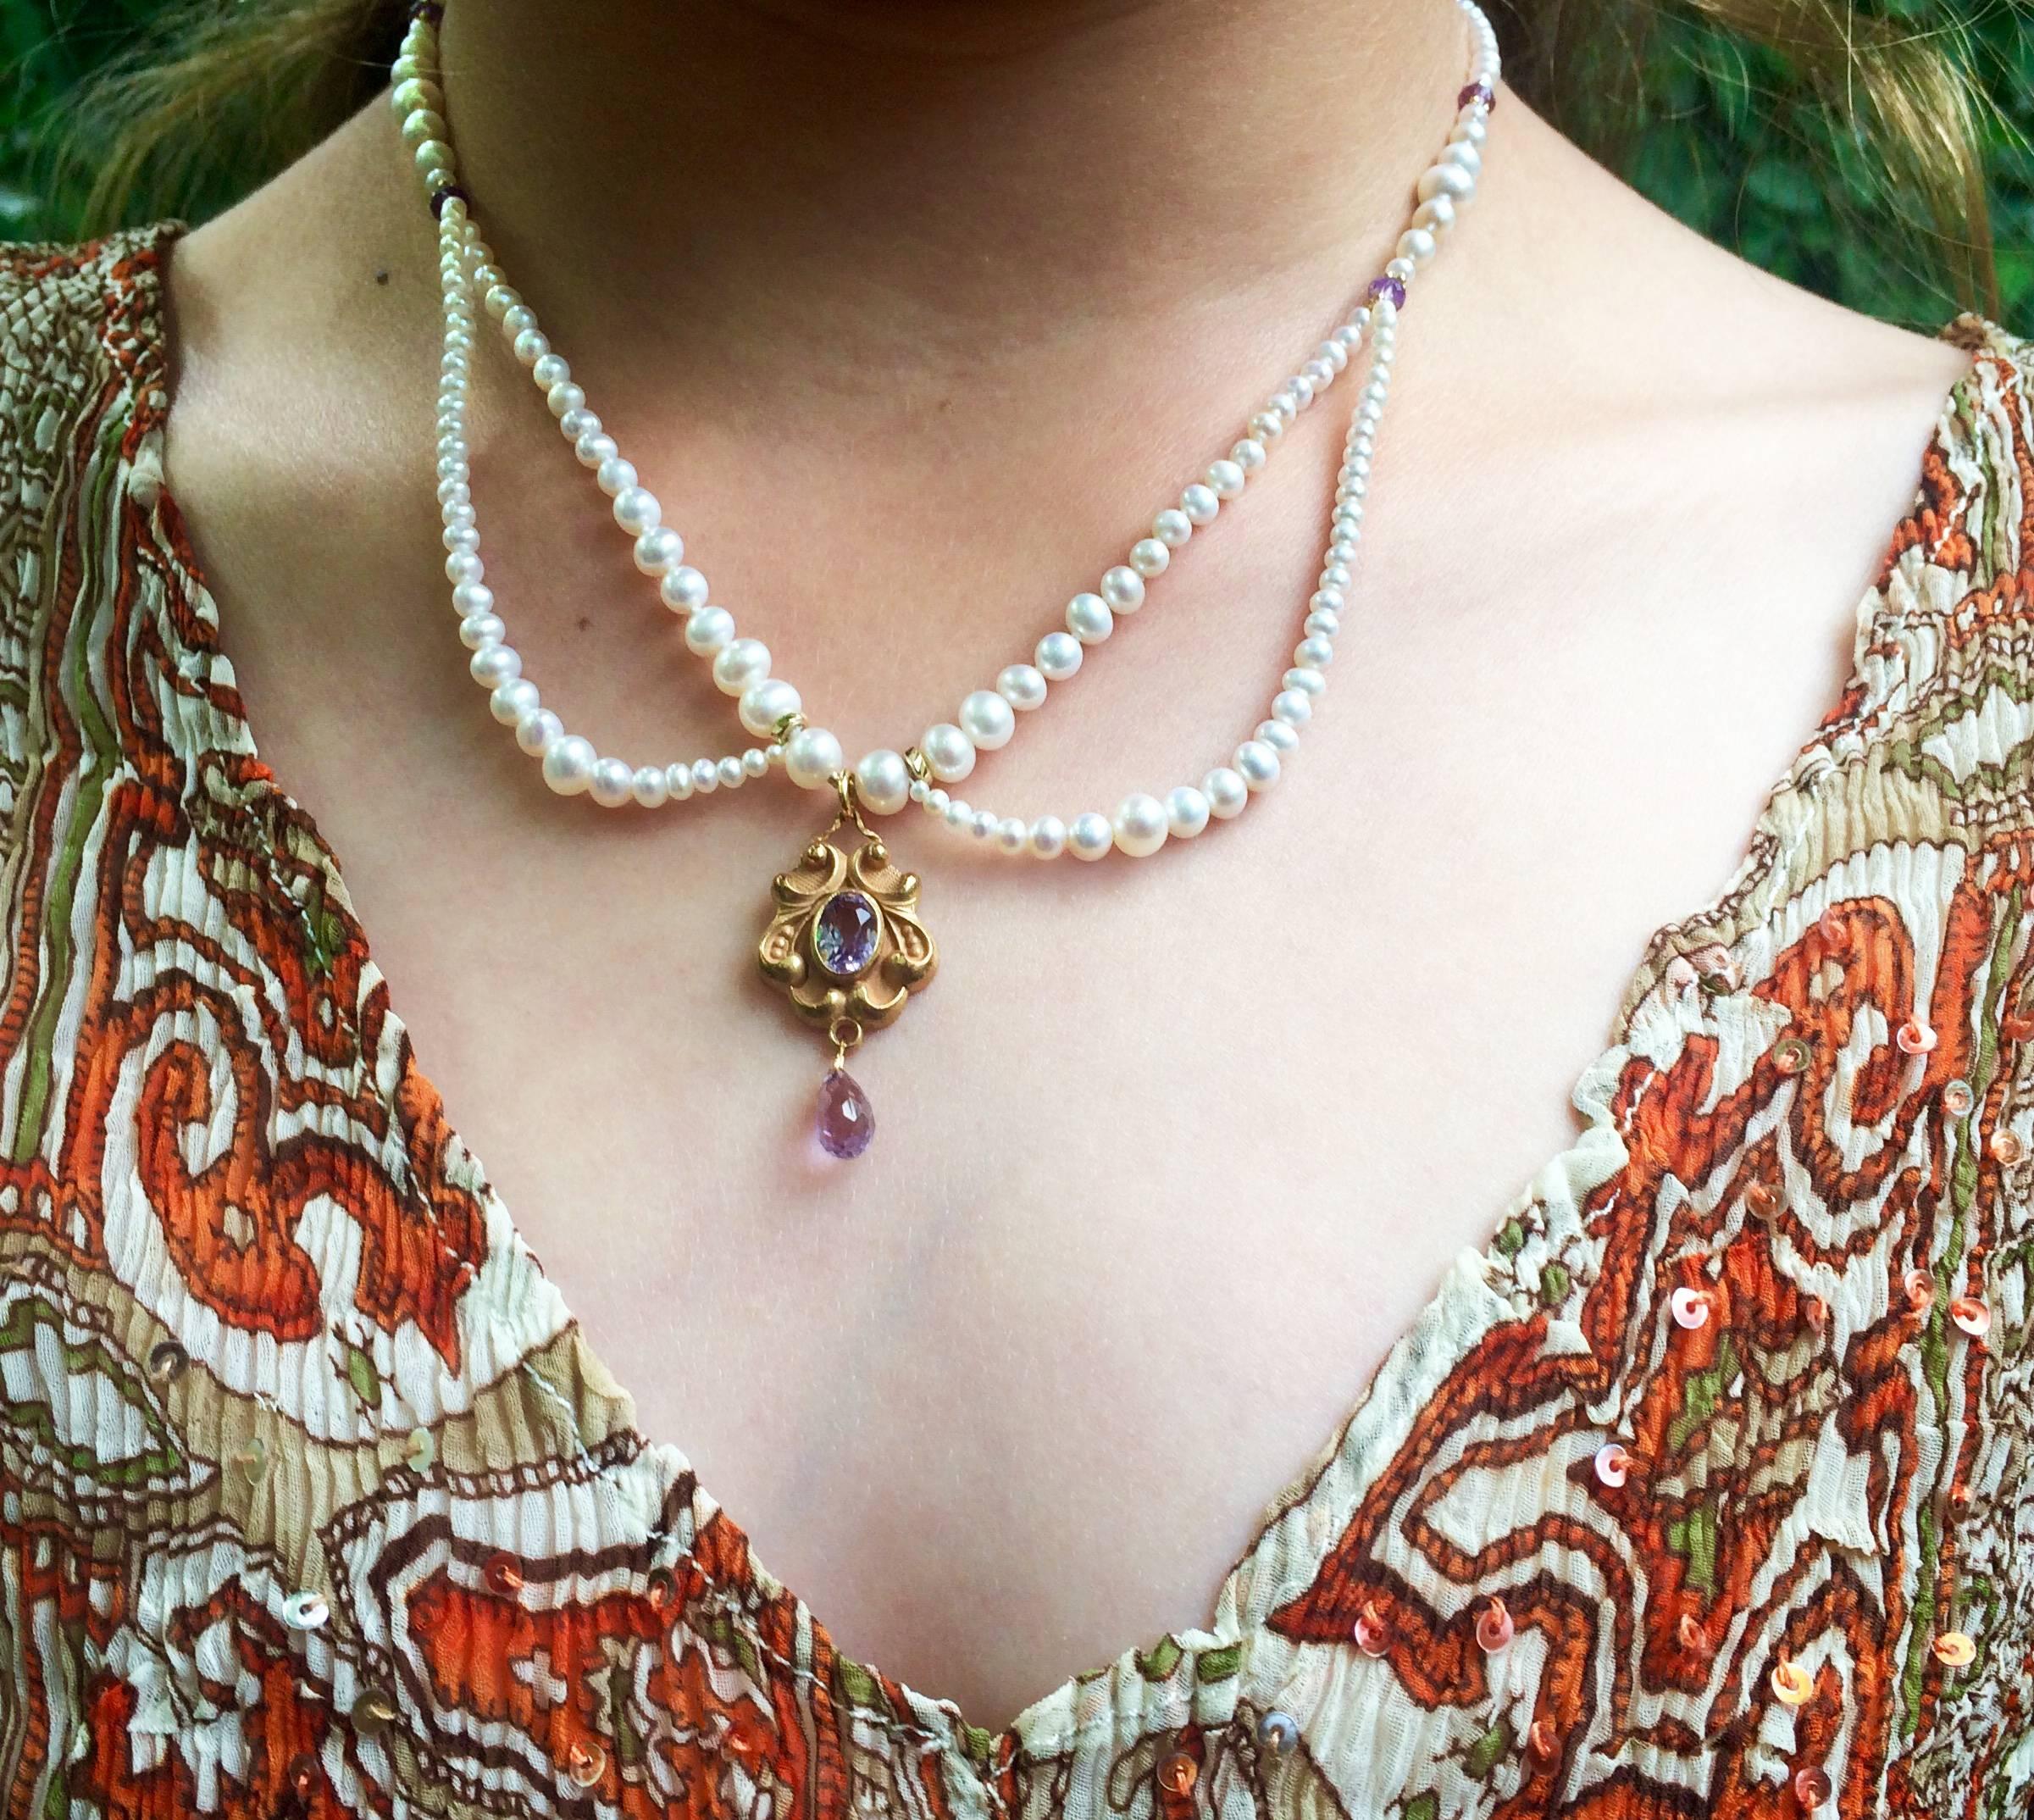 Artist Marina J Graduated Pearl and Amethyst Necklace with Vintage Gold Pendant